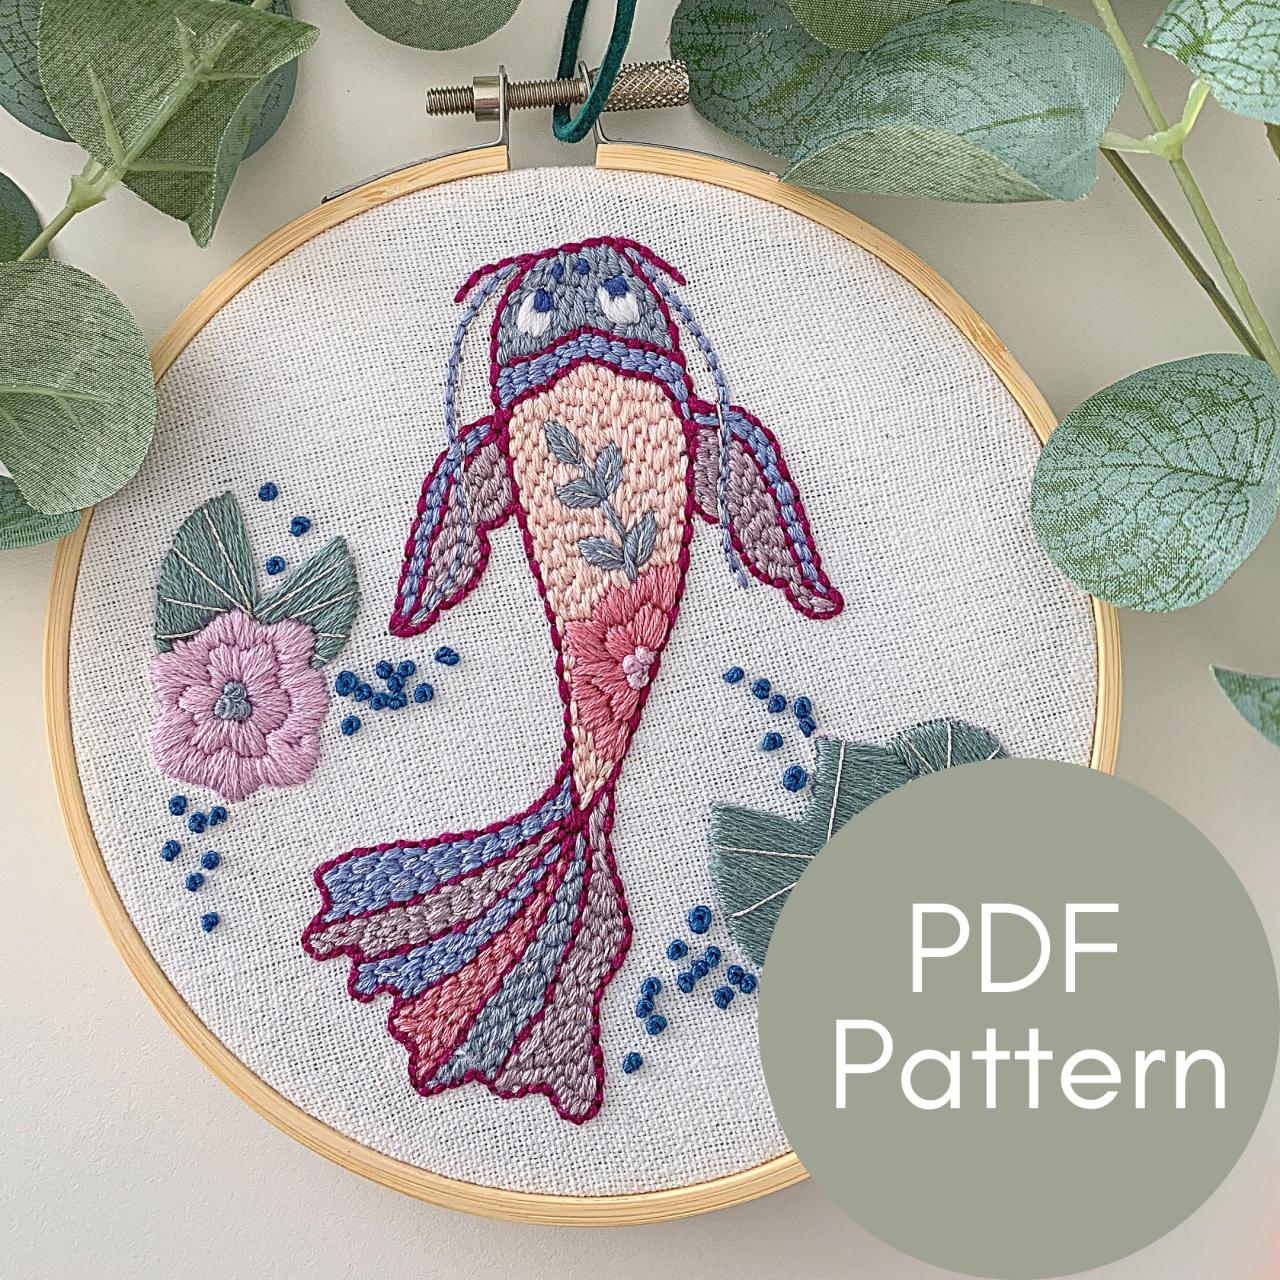 Koi Fish Hand Embroidery Pattern | Fish Embroidery | Digital Download | Koi Pond | Intermediate Embroidery | Animal Embroidery | Lily Pads